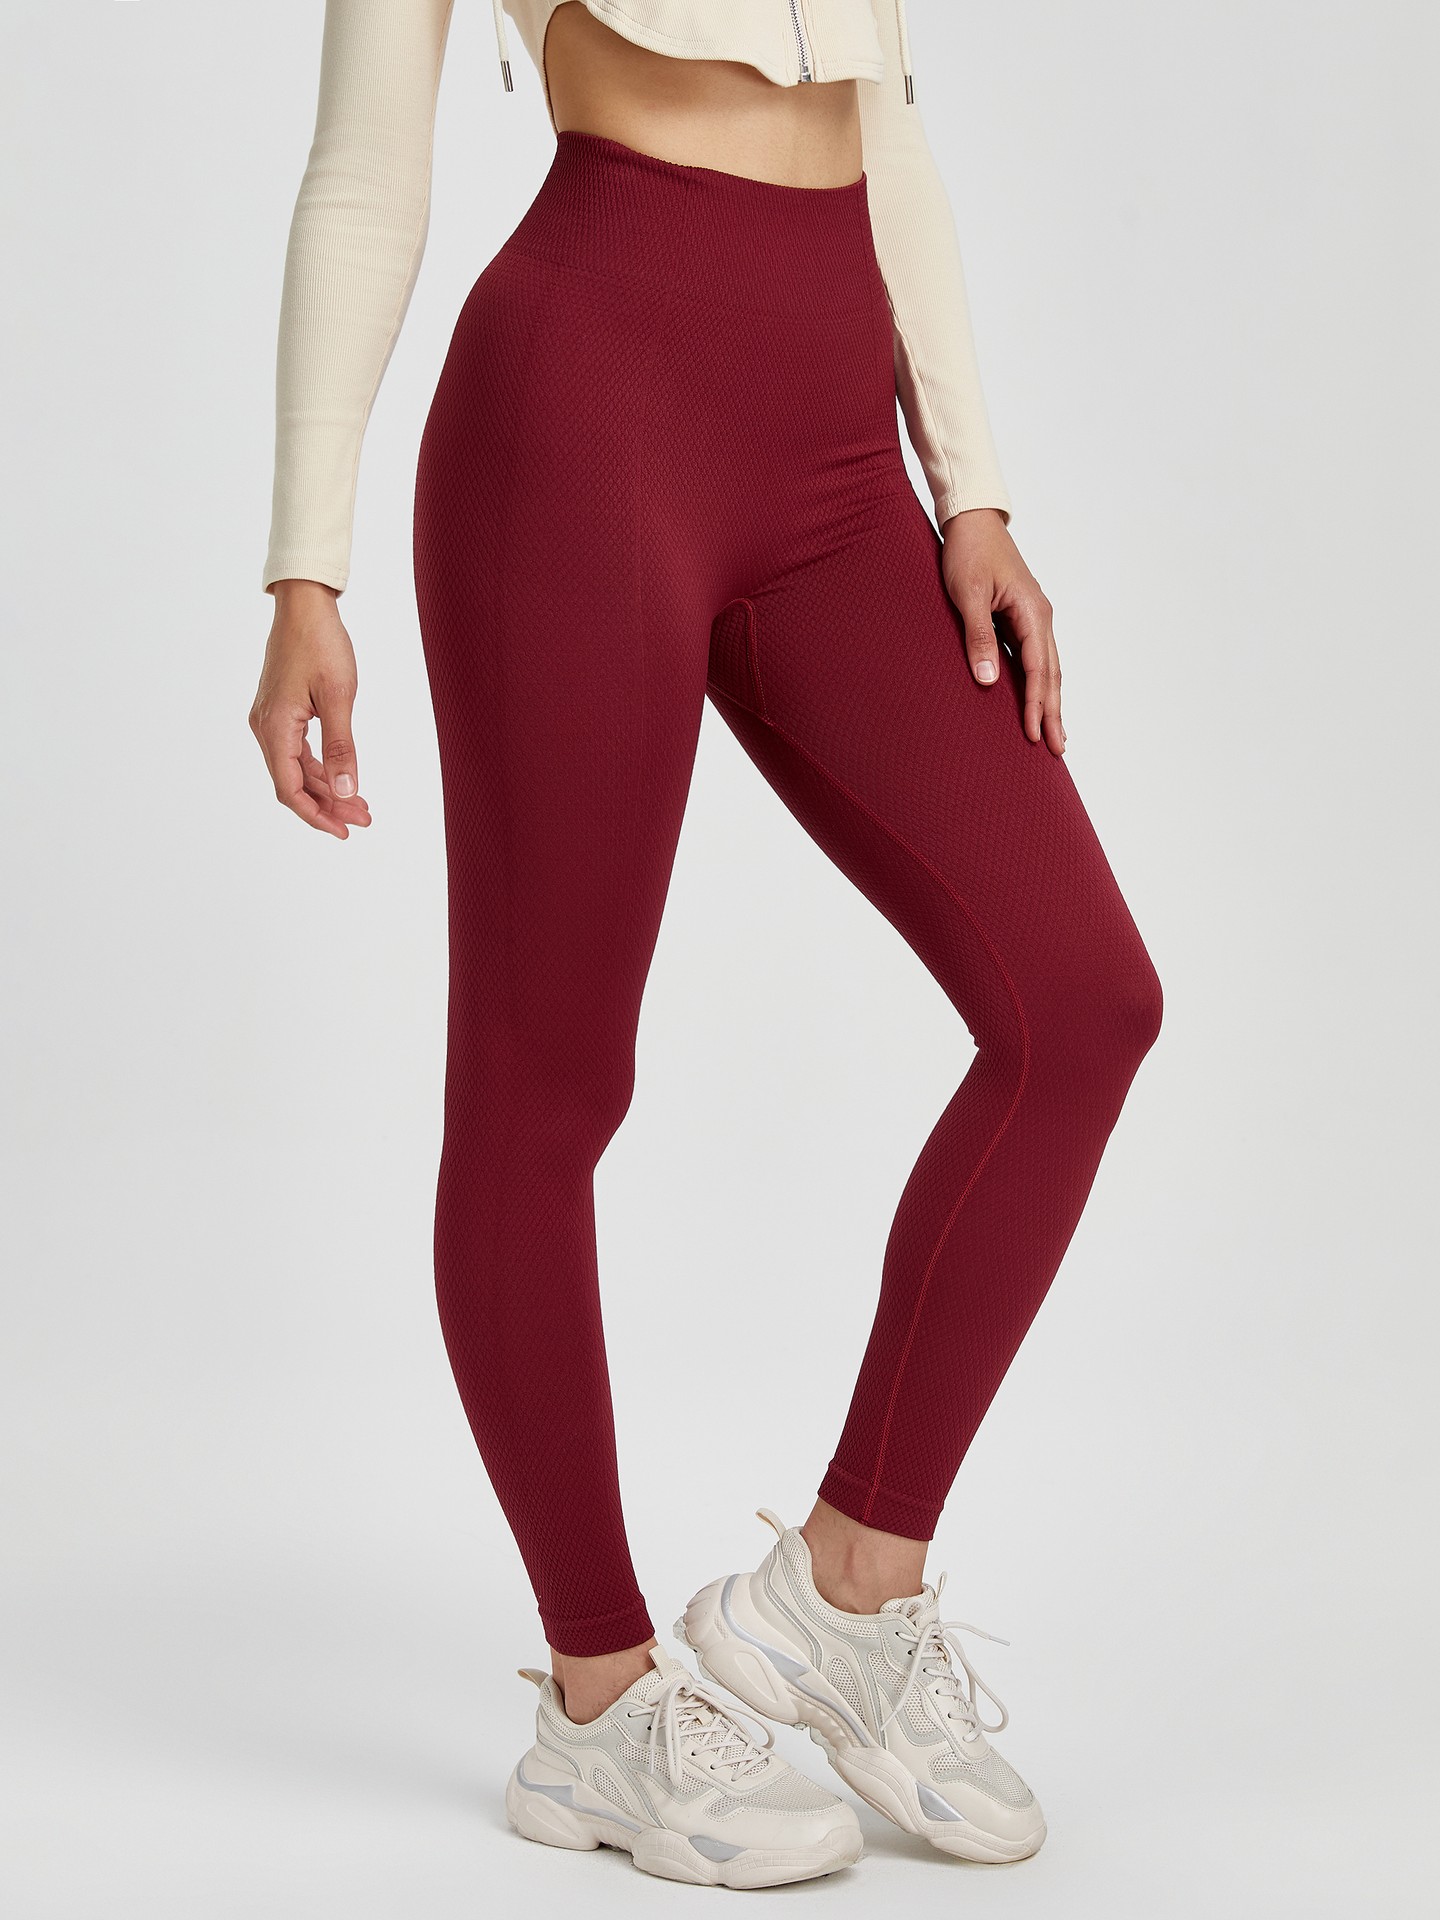 High Waist, Stretchy and Recovery Sports Leggings Burgundy